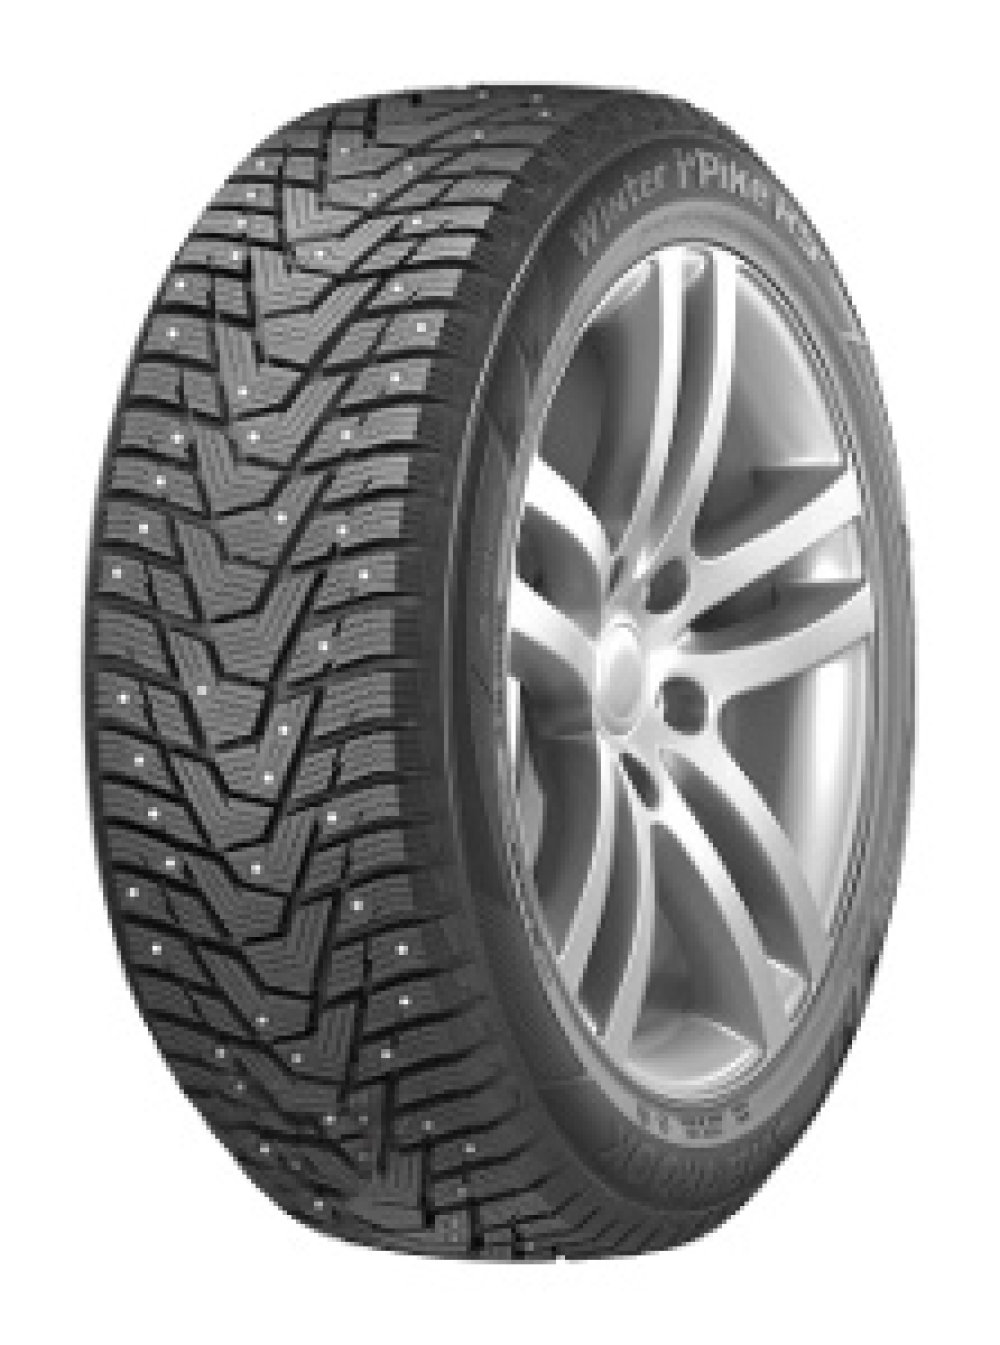 Image of Hankook Winter I*Pike RS2 W429 ( 245/45 R19 102T XL, pneumatico chiodato, SBL )